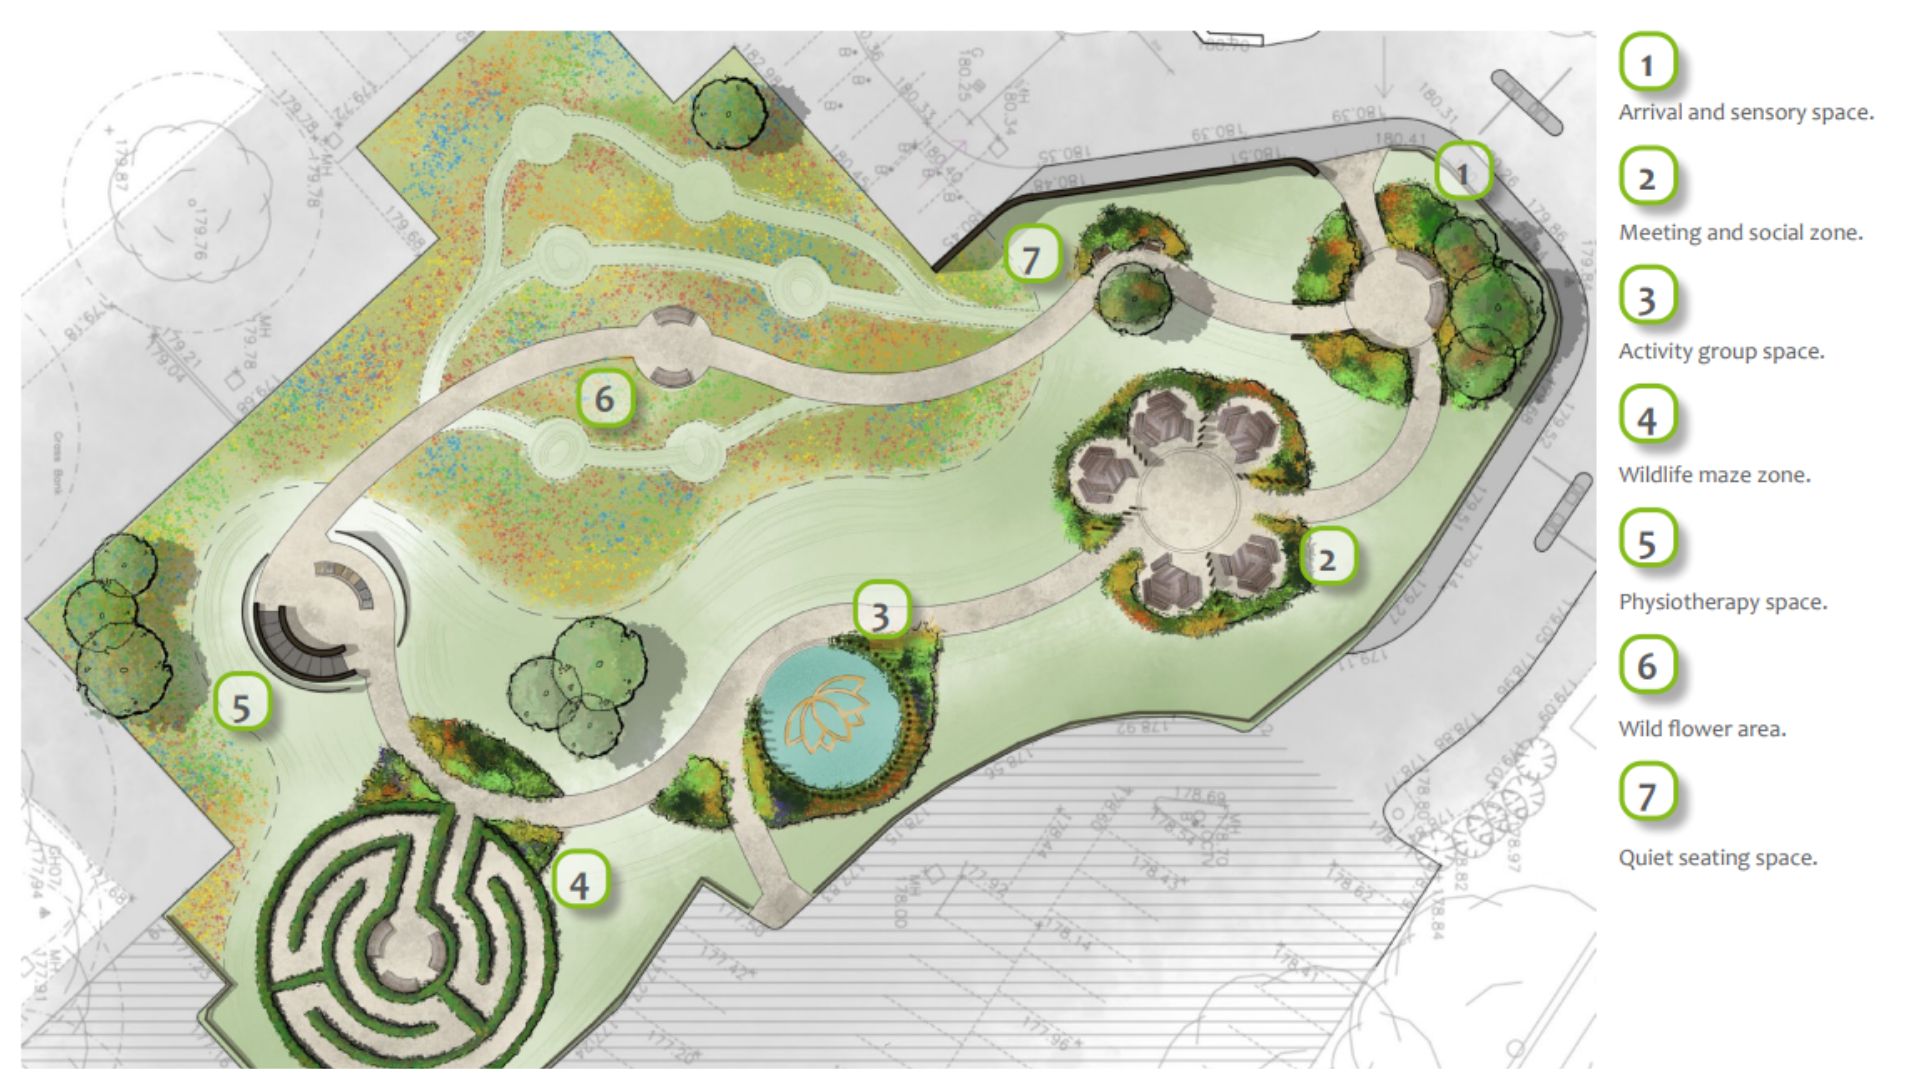 A graphic showing a plan of the garden zones